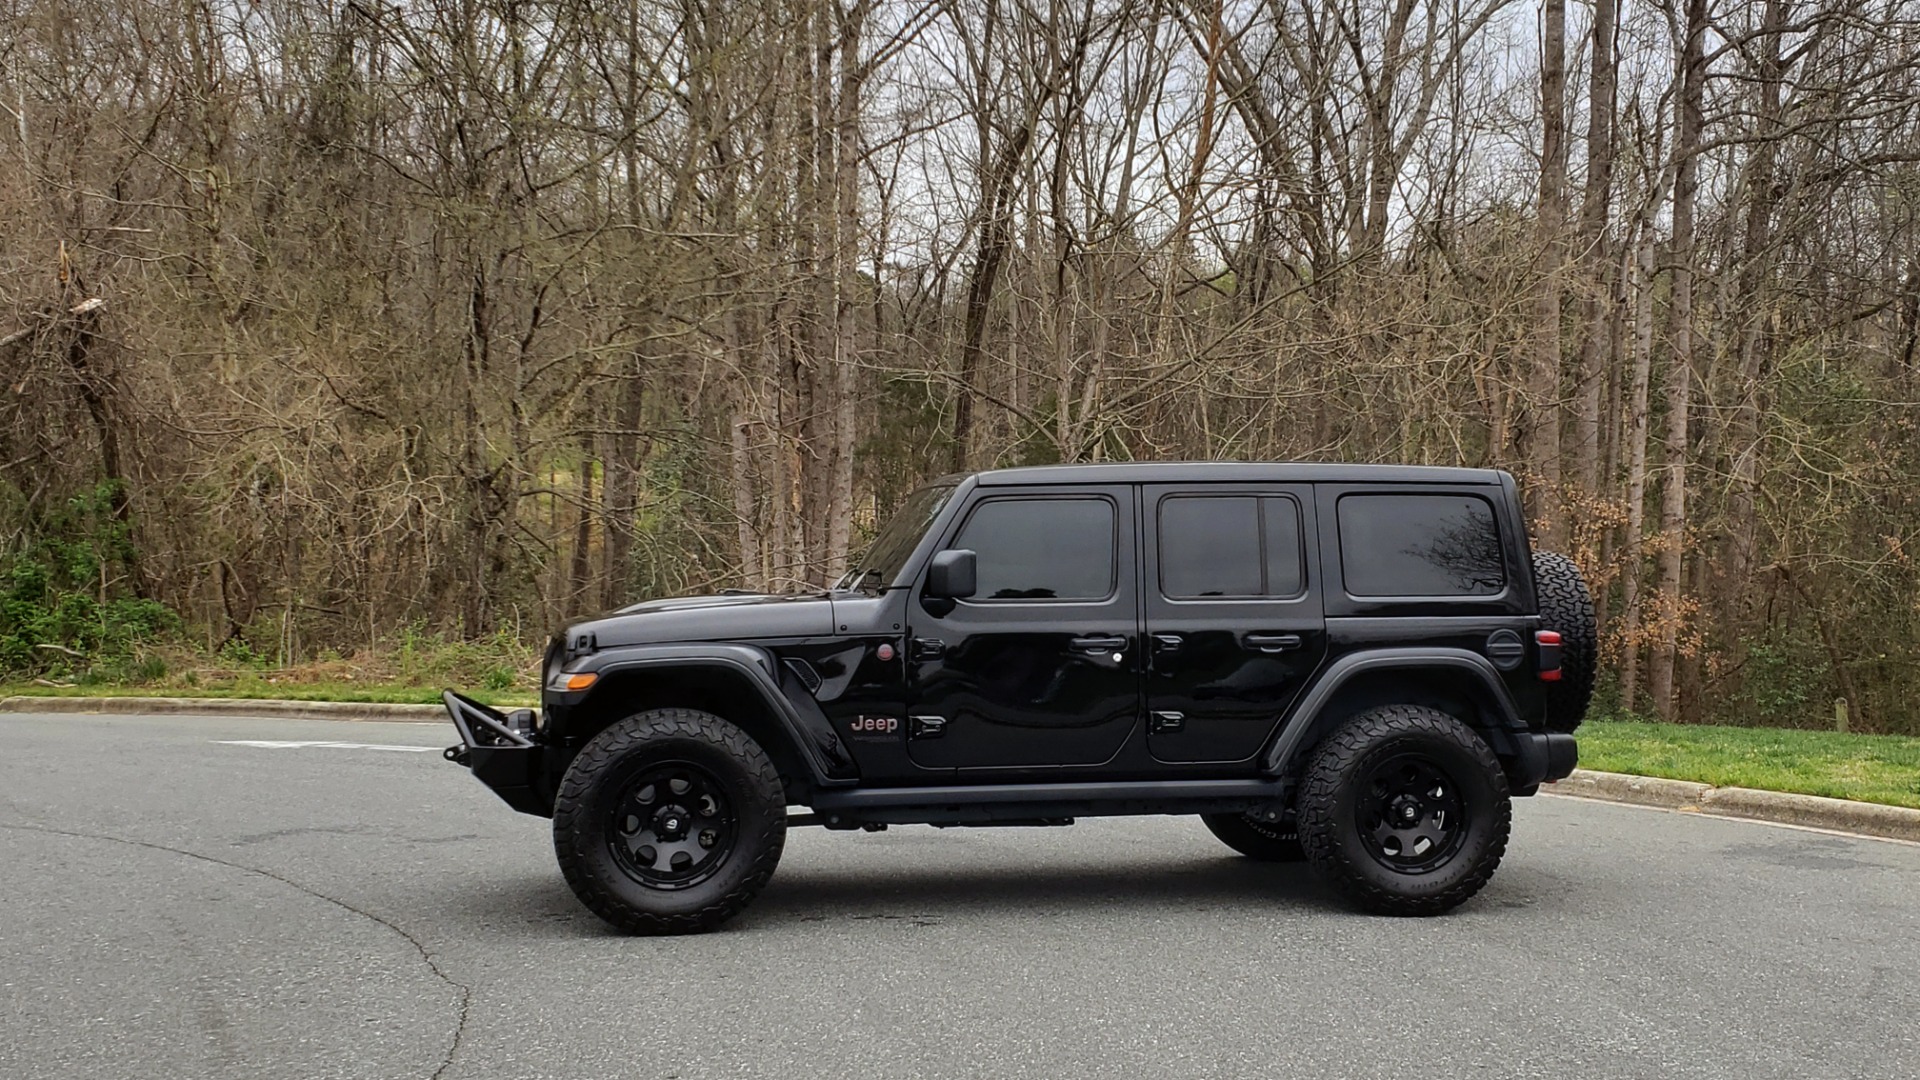 Used 2019 Jeep WRANGLER UNLIMITED RUBICON 4WD / V6 / 8-SPD AUTO / NAV / PWR TOP / REARVIEW for sale Sold at Formula Imports in Charlotte NC 28227 4